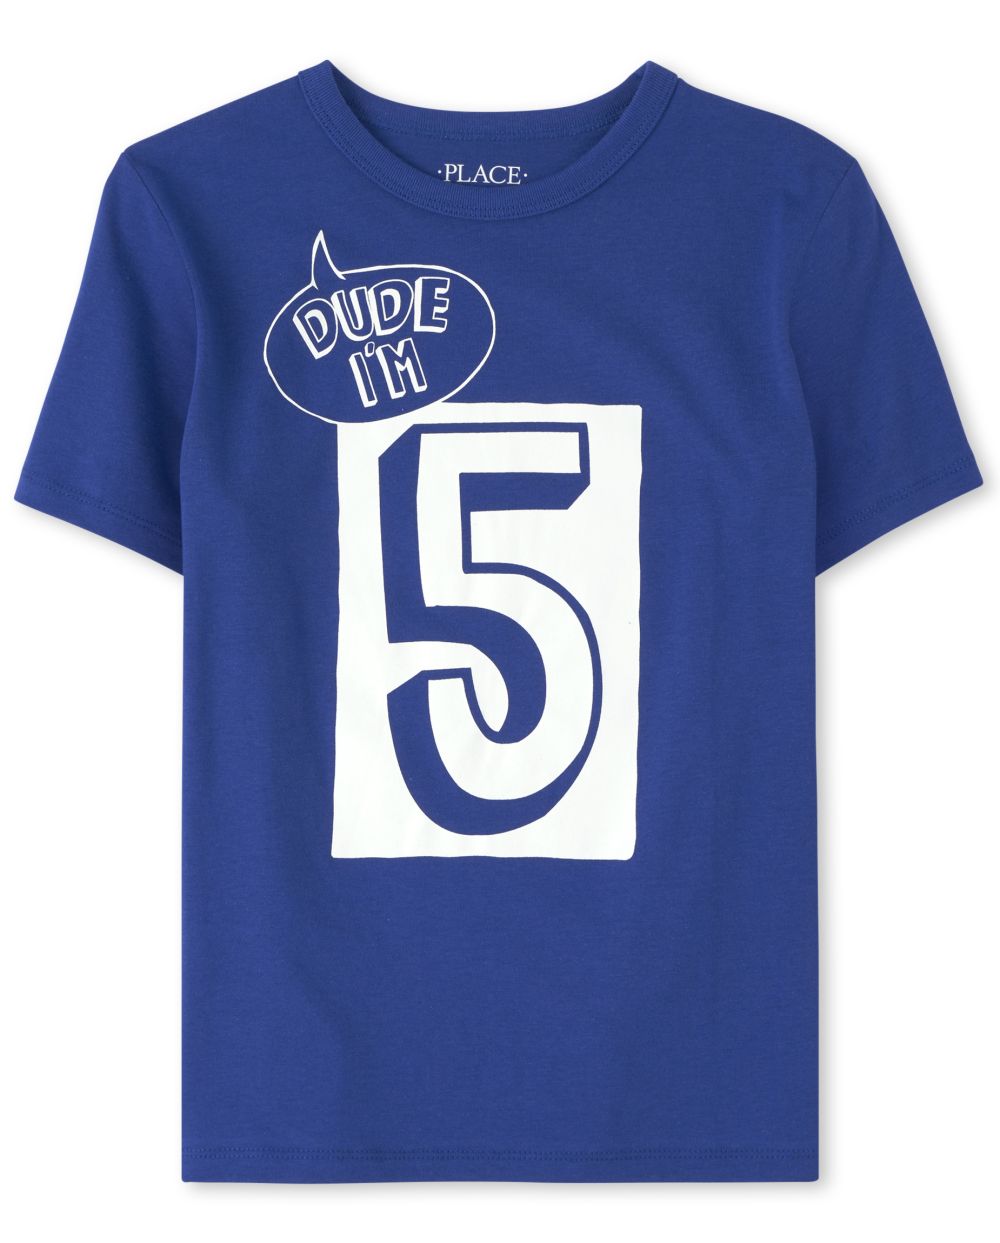 

s Boys Birthday Dude I'm 5 Graphic Tee - Blue T-Shirt - The Children's Place